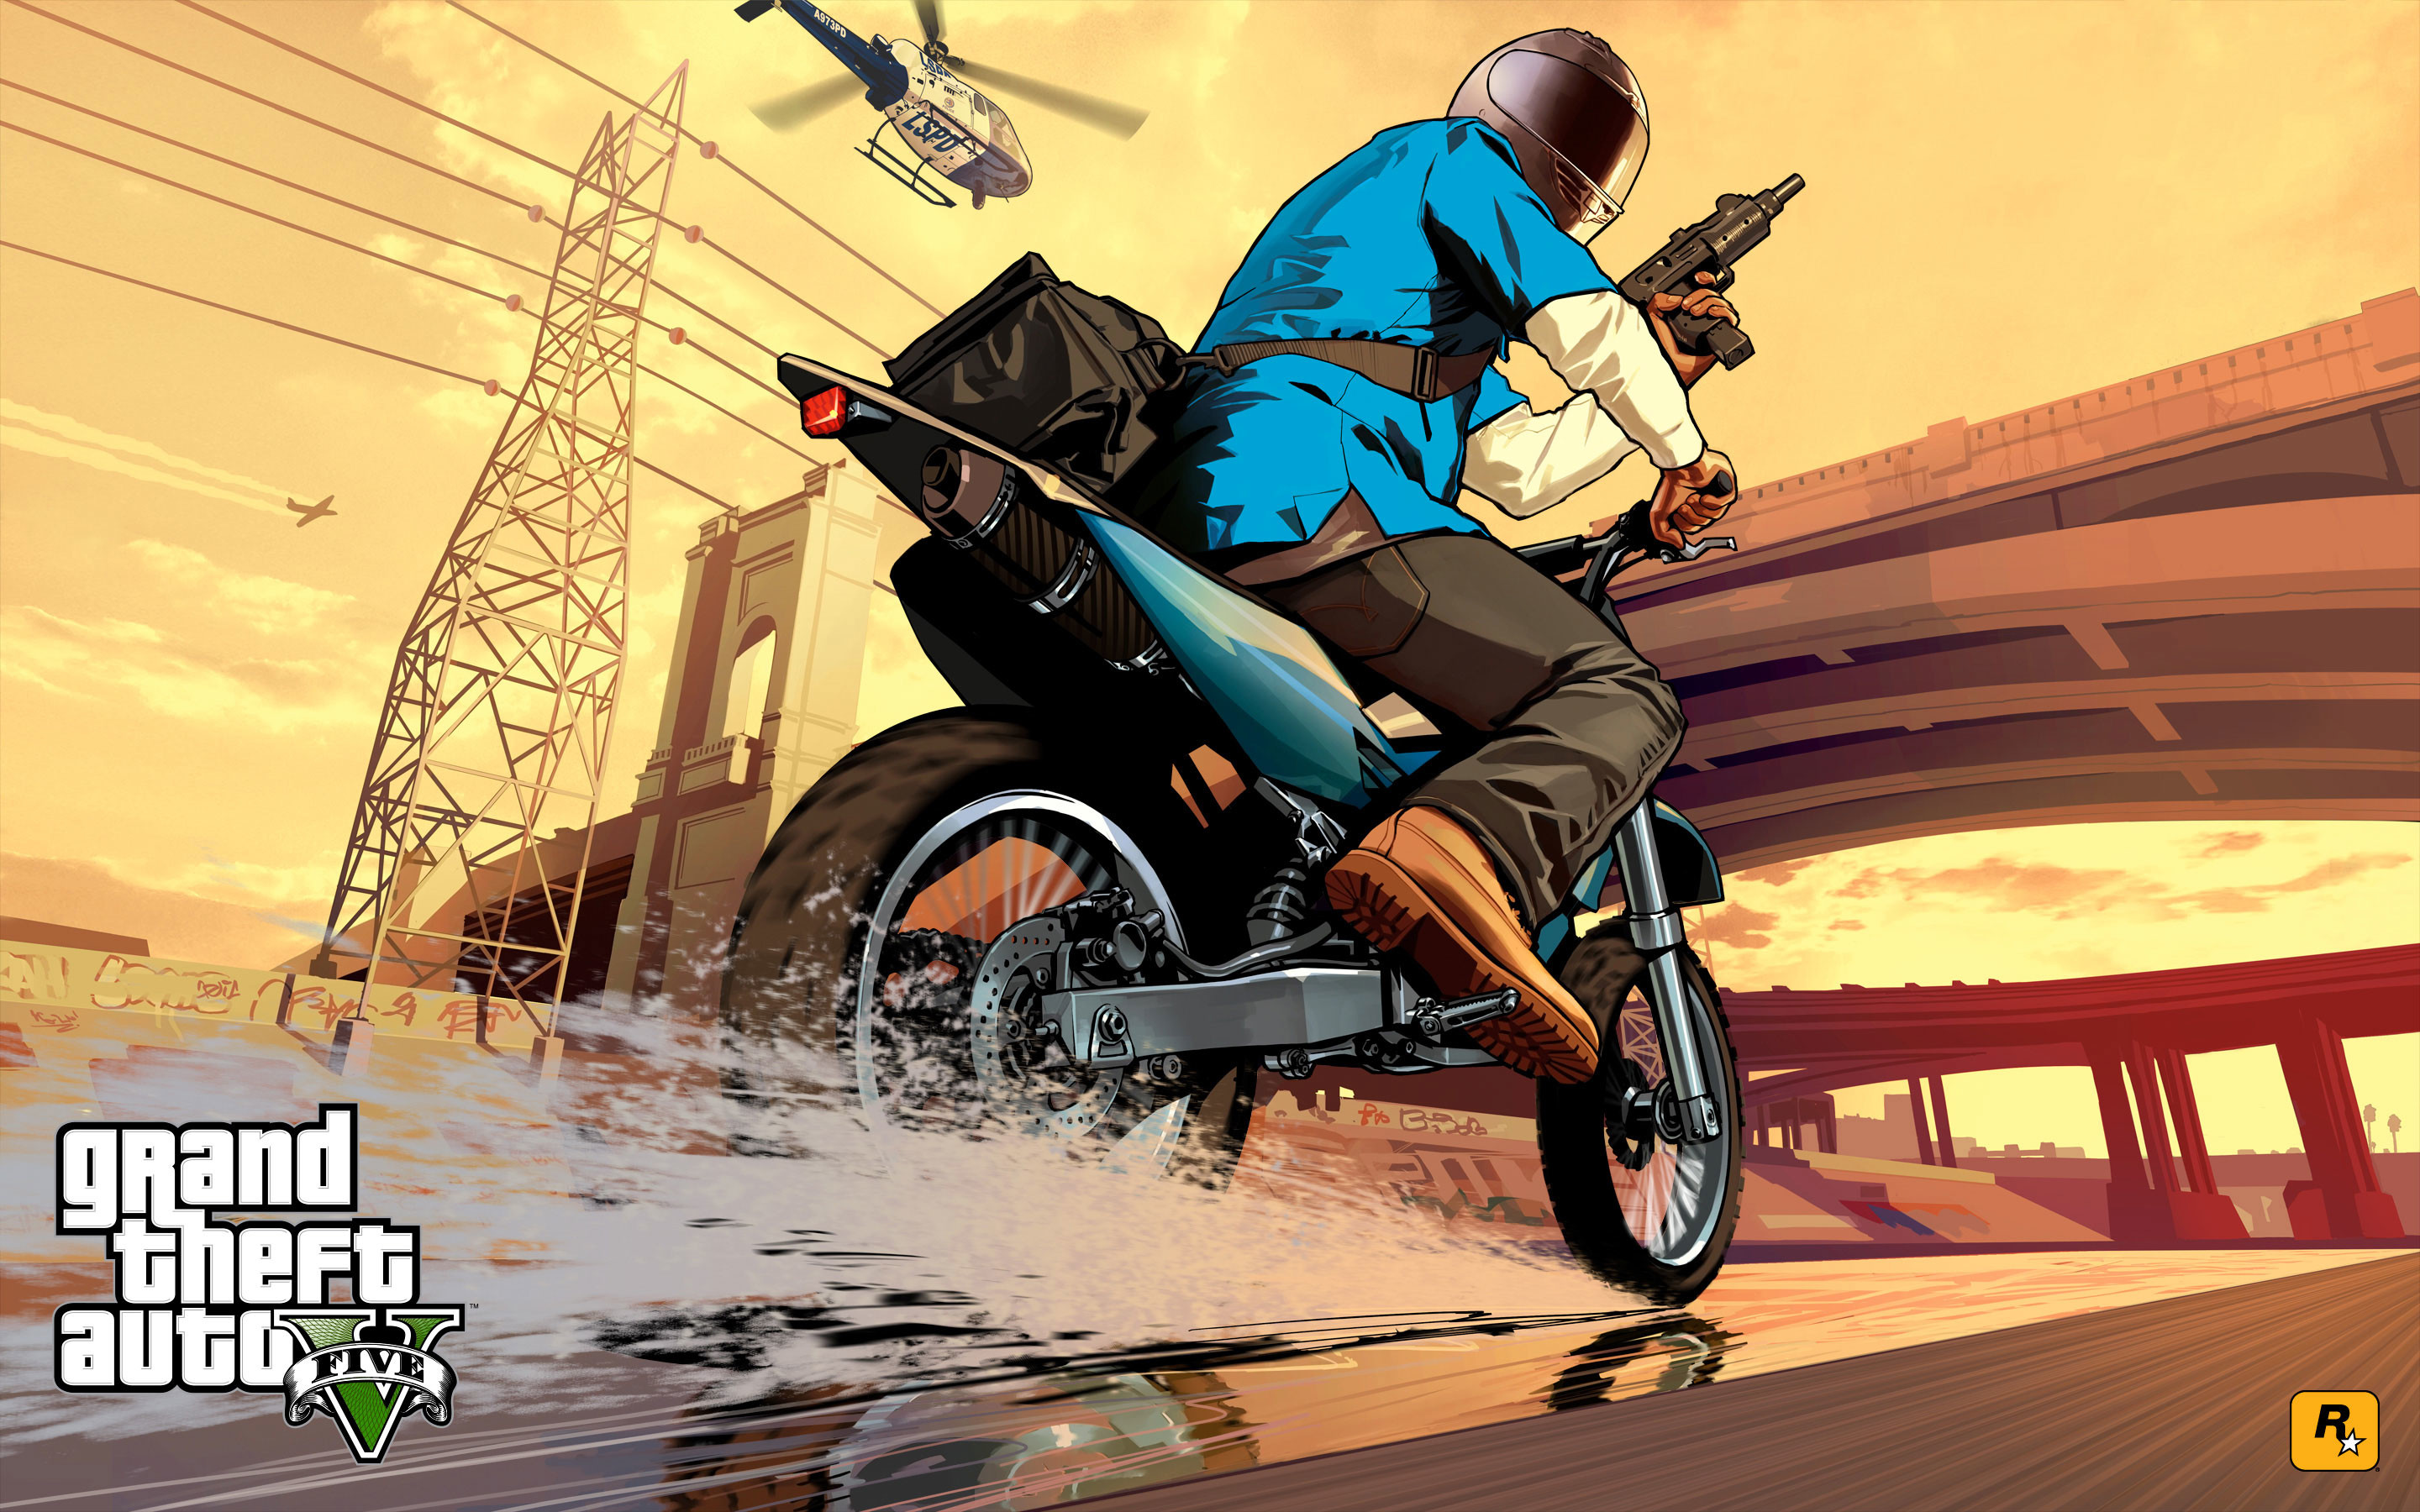 2880x1800 Gta 5 Wallpapers-Get the Newest Collection of Gta 5 Wallpapers for your  DesktopPCs,